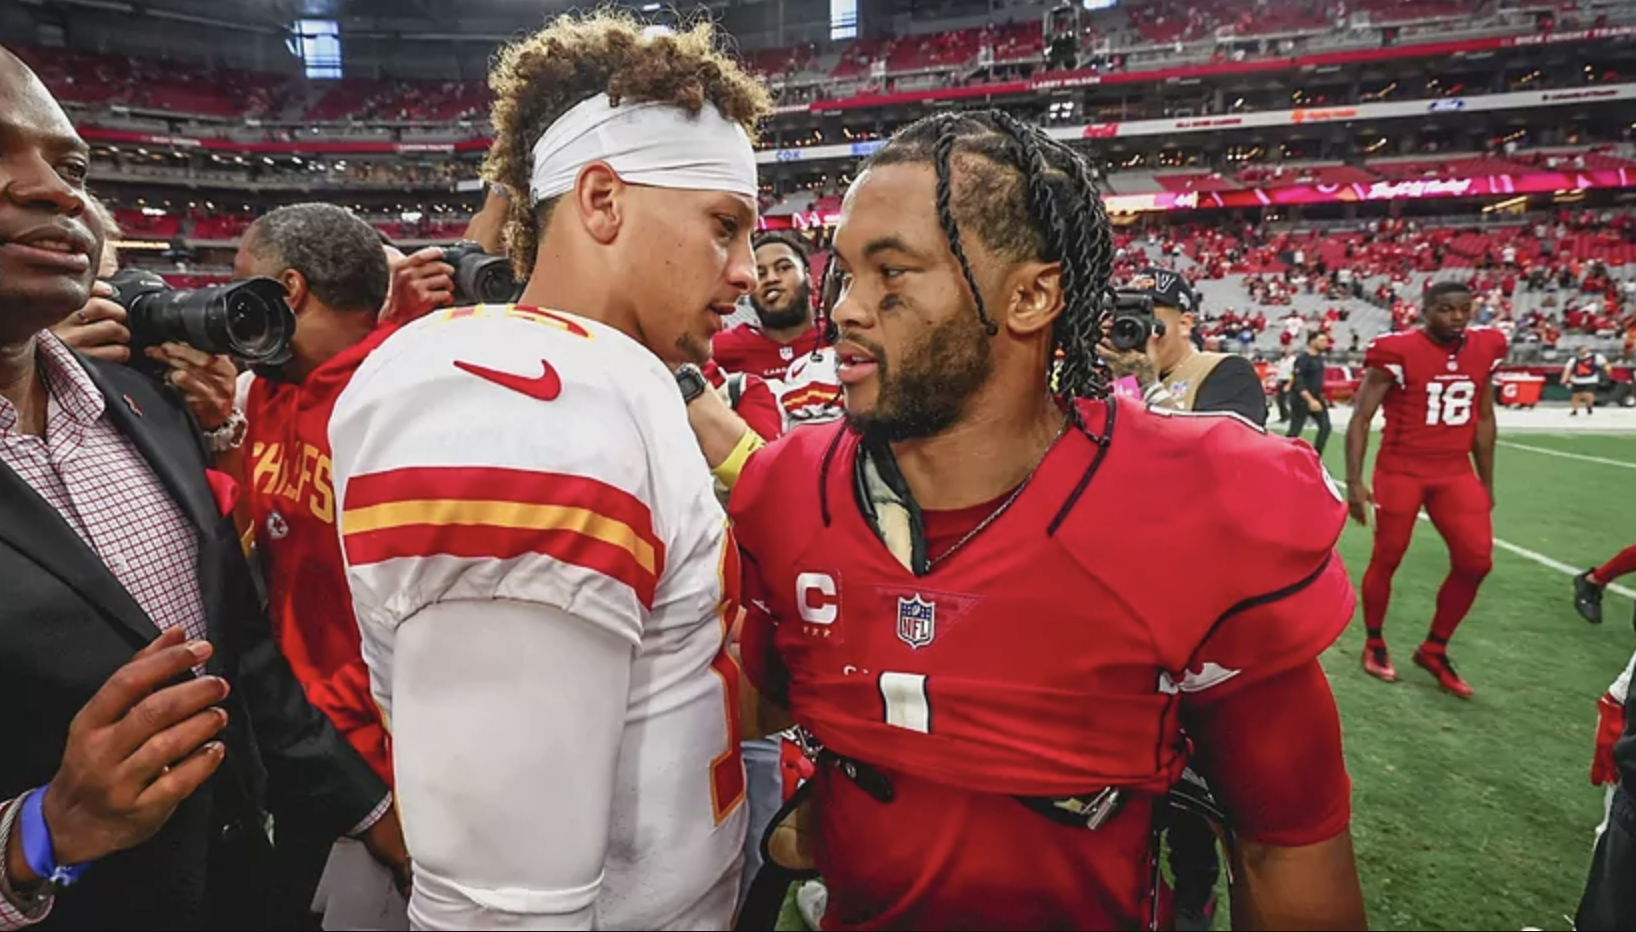 The Patrick Mahomes show: QB crushes Cardinals with five touchdown performance